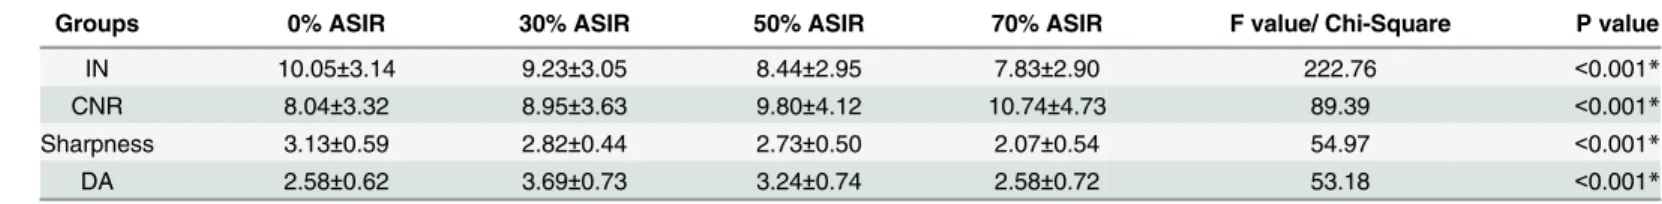 Table 2. Objective and subjective image quality assessment with different ASIR percentages.